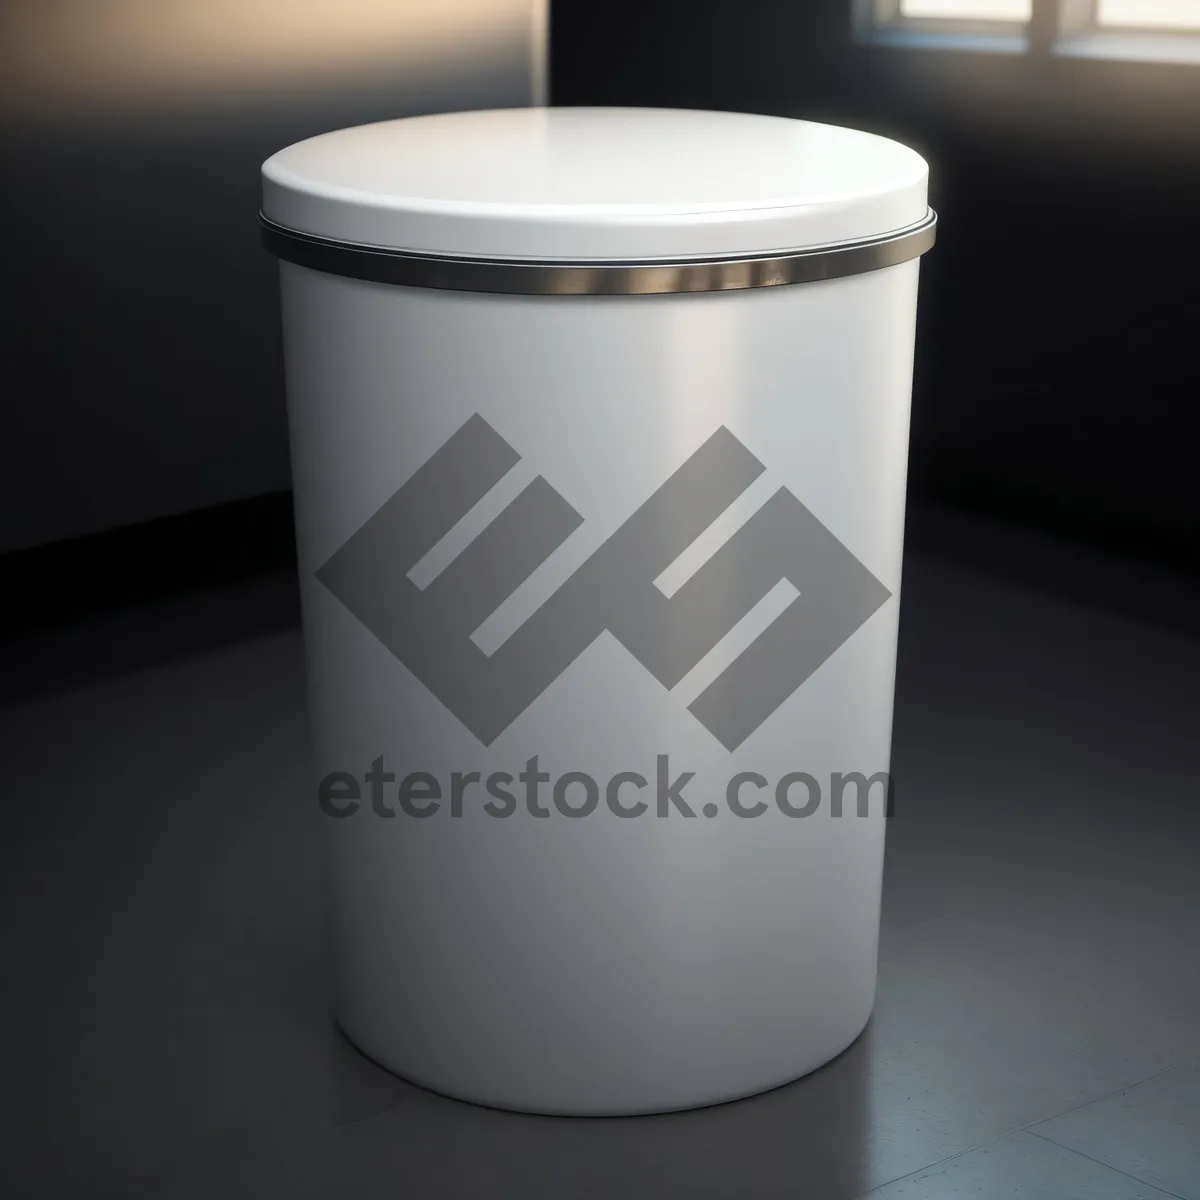 Picture of Empty coffee mug on table